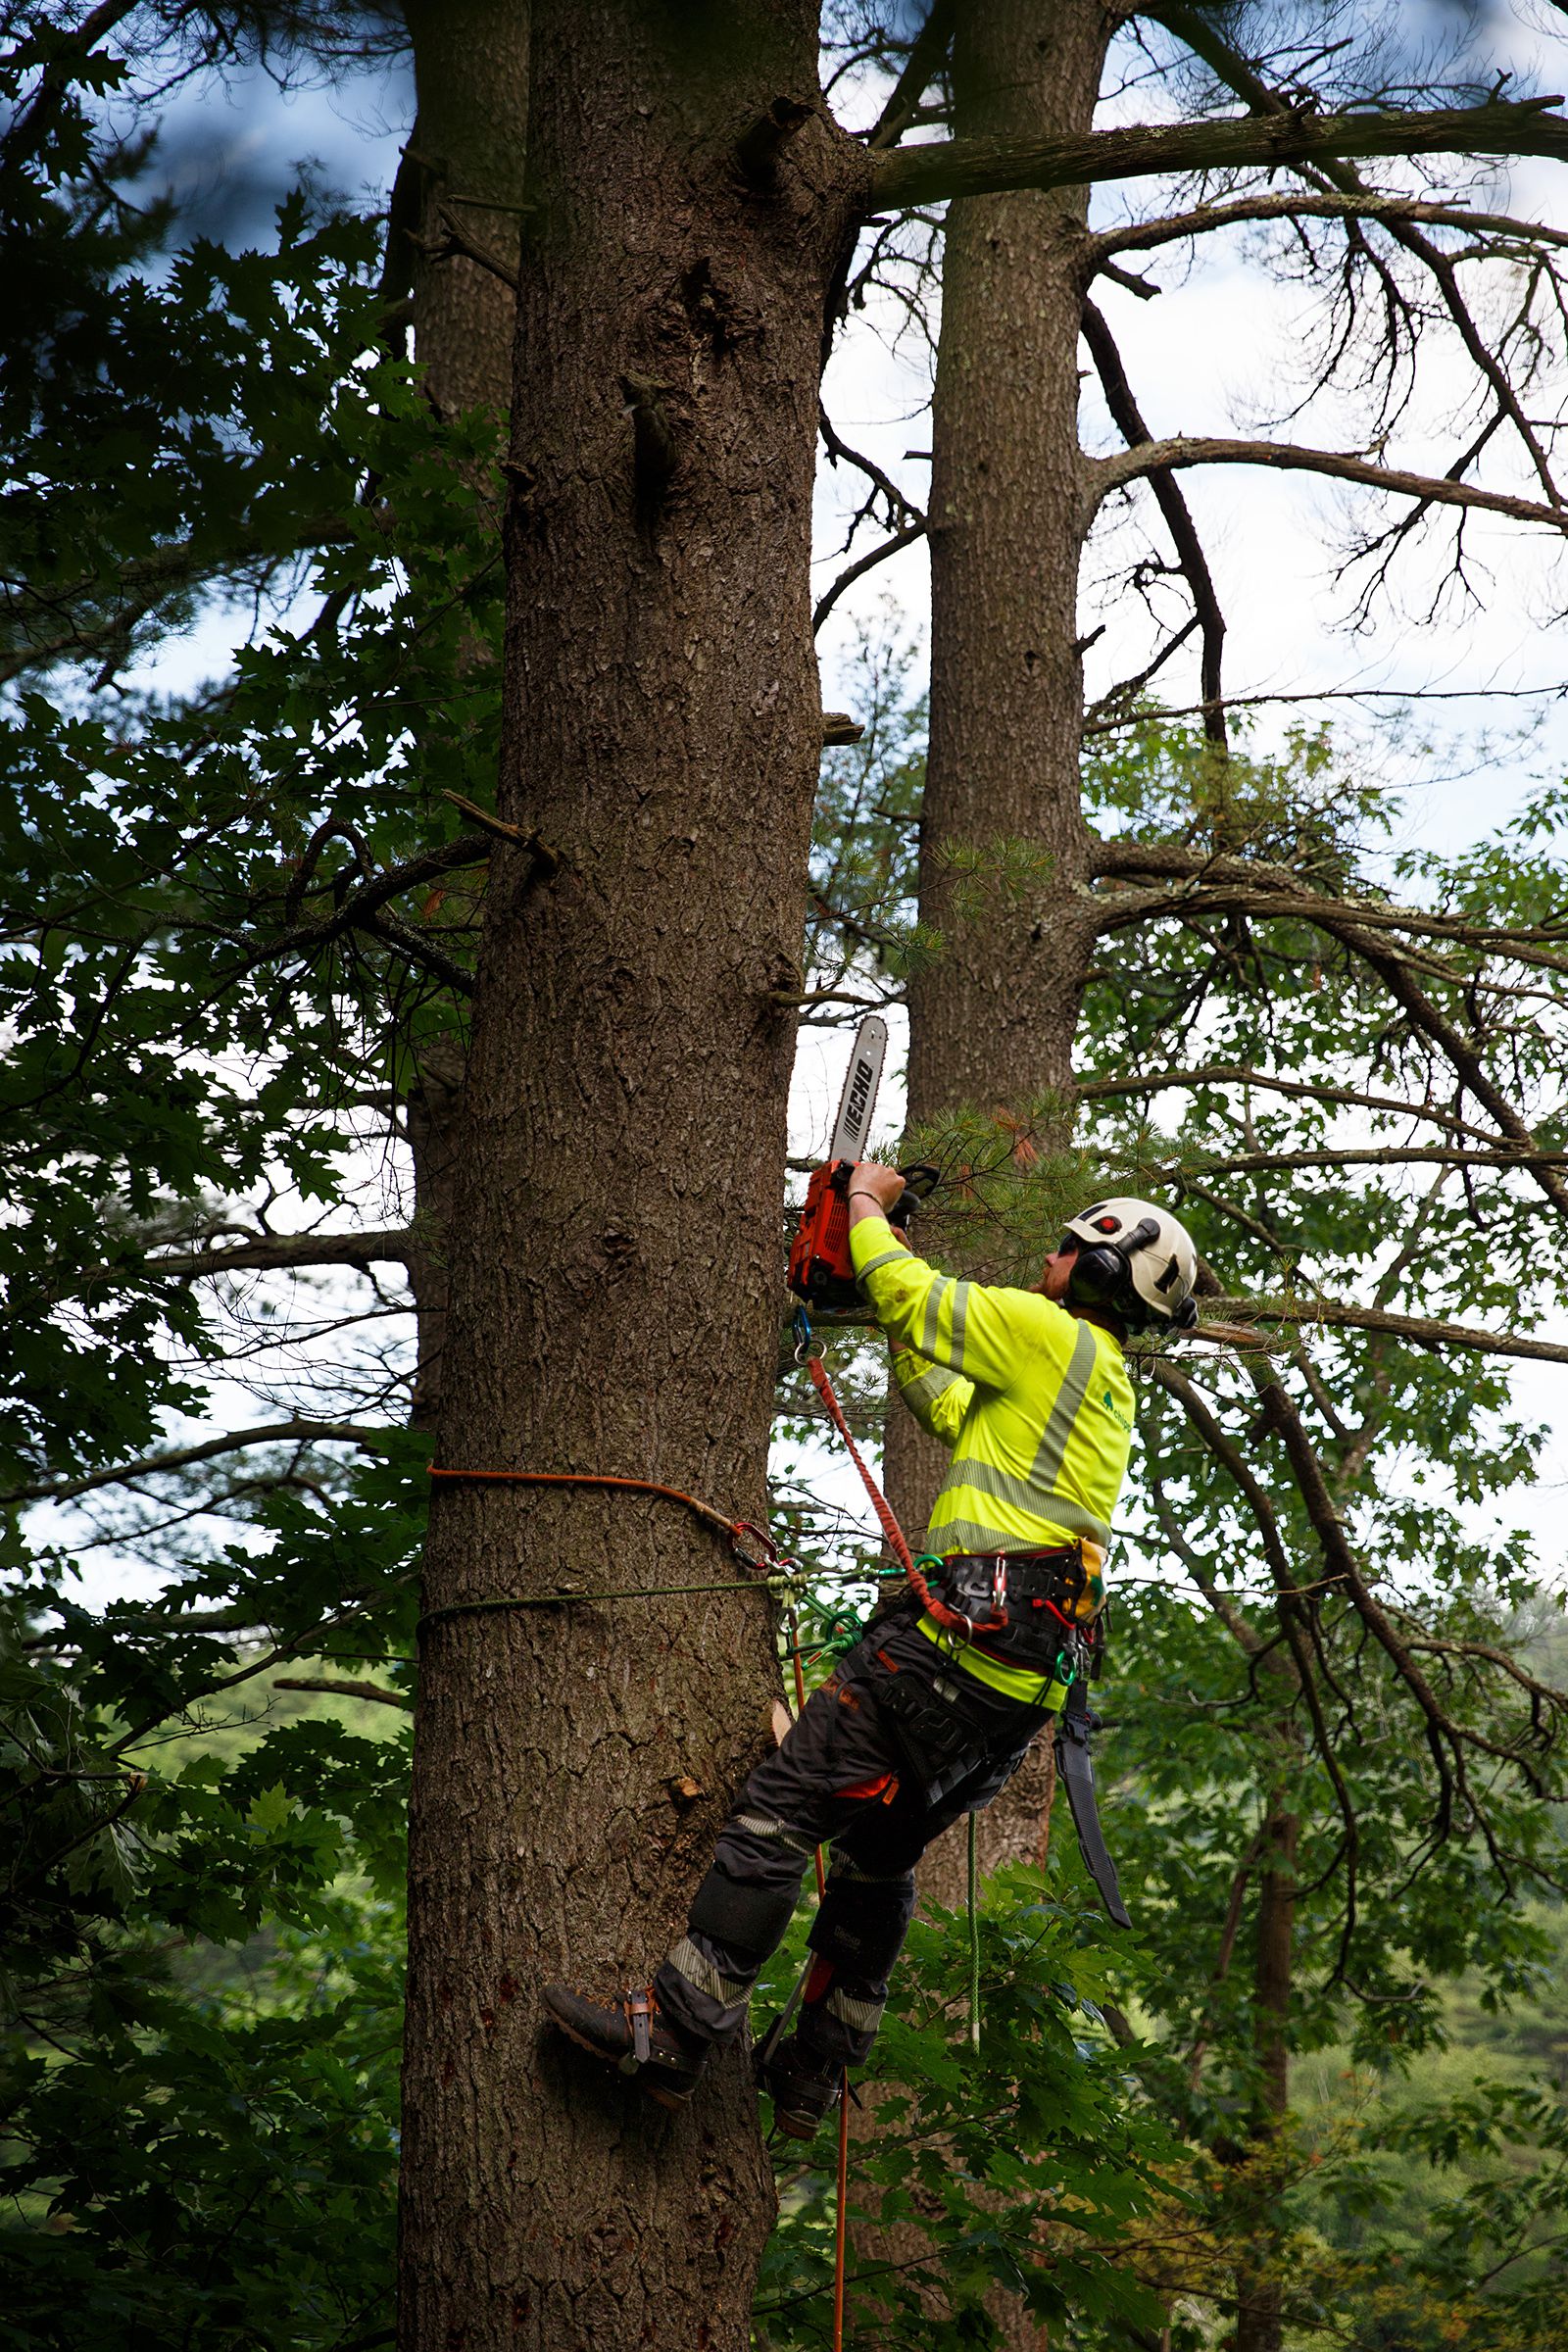 Nathaniel Moore, of Canaan, N.H., cuts down branches from a tree slated for removal by a Chippers, Inc. crew at a home in Hanover, N.H., on Wednesday, June 30, 2021. (Valley News / Report For America - Alex Driehaus) Copyright Valley News. May not be reprinted or used online without permission. Send requests to permission@vnews.com.